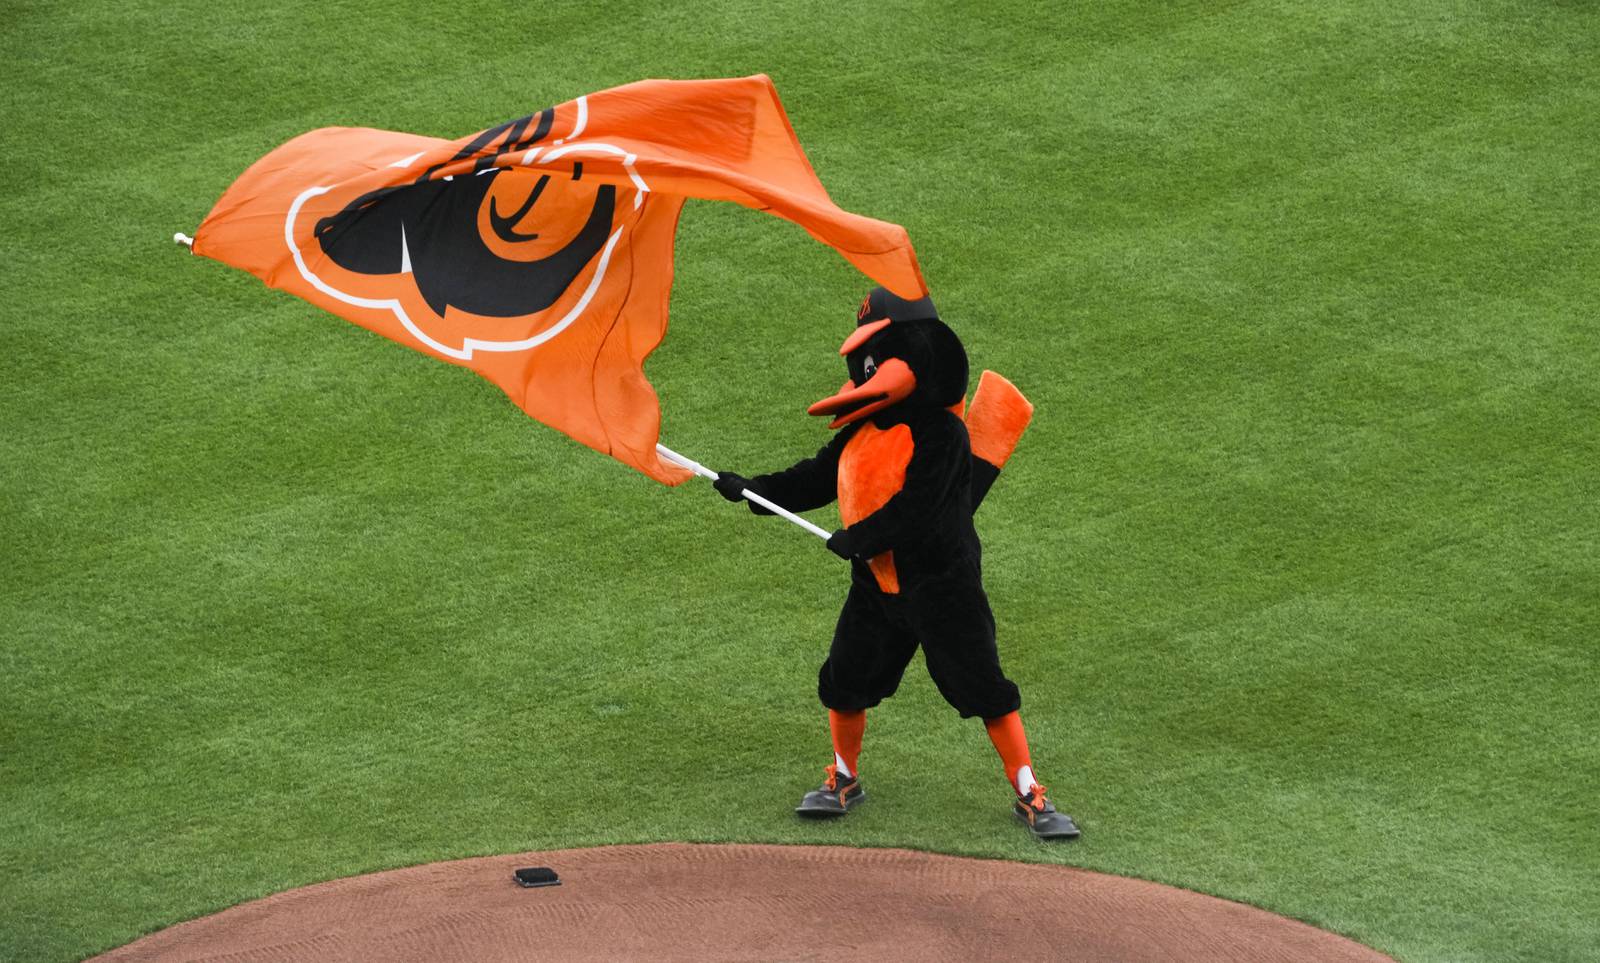 Scenes of the Orioles' home opener at Camden Yards on April 7, 2023.